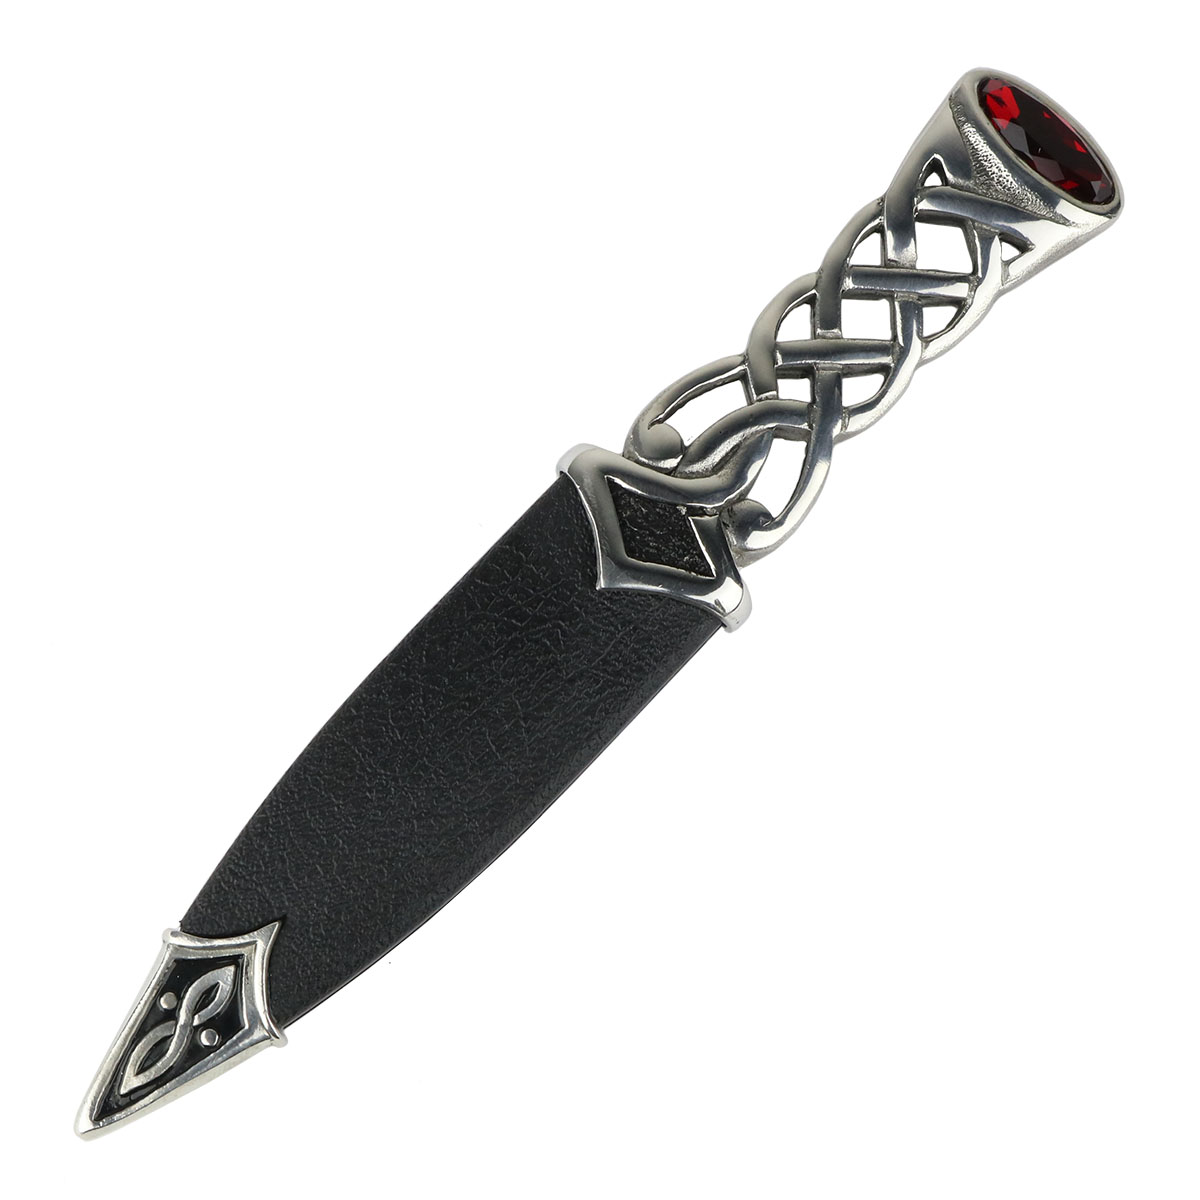 A Pewter Celtic Knot Sgian Dubh with a red stone.